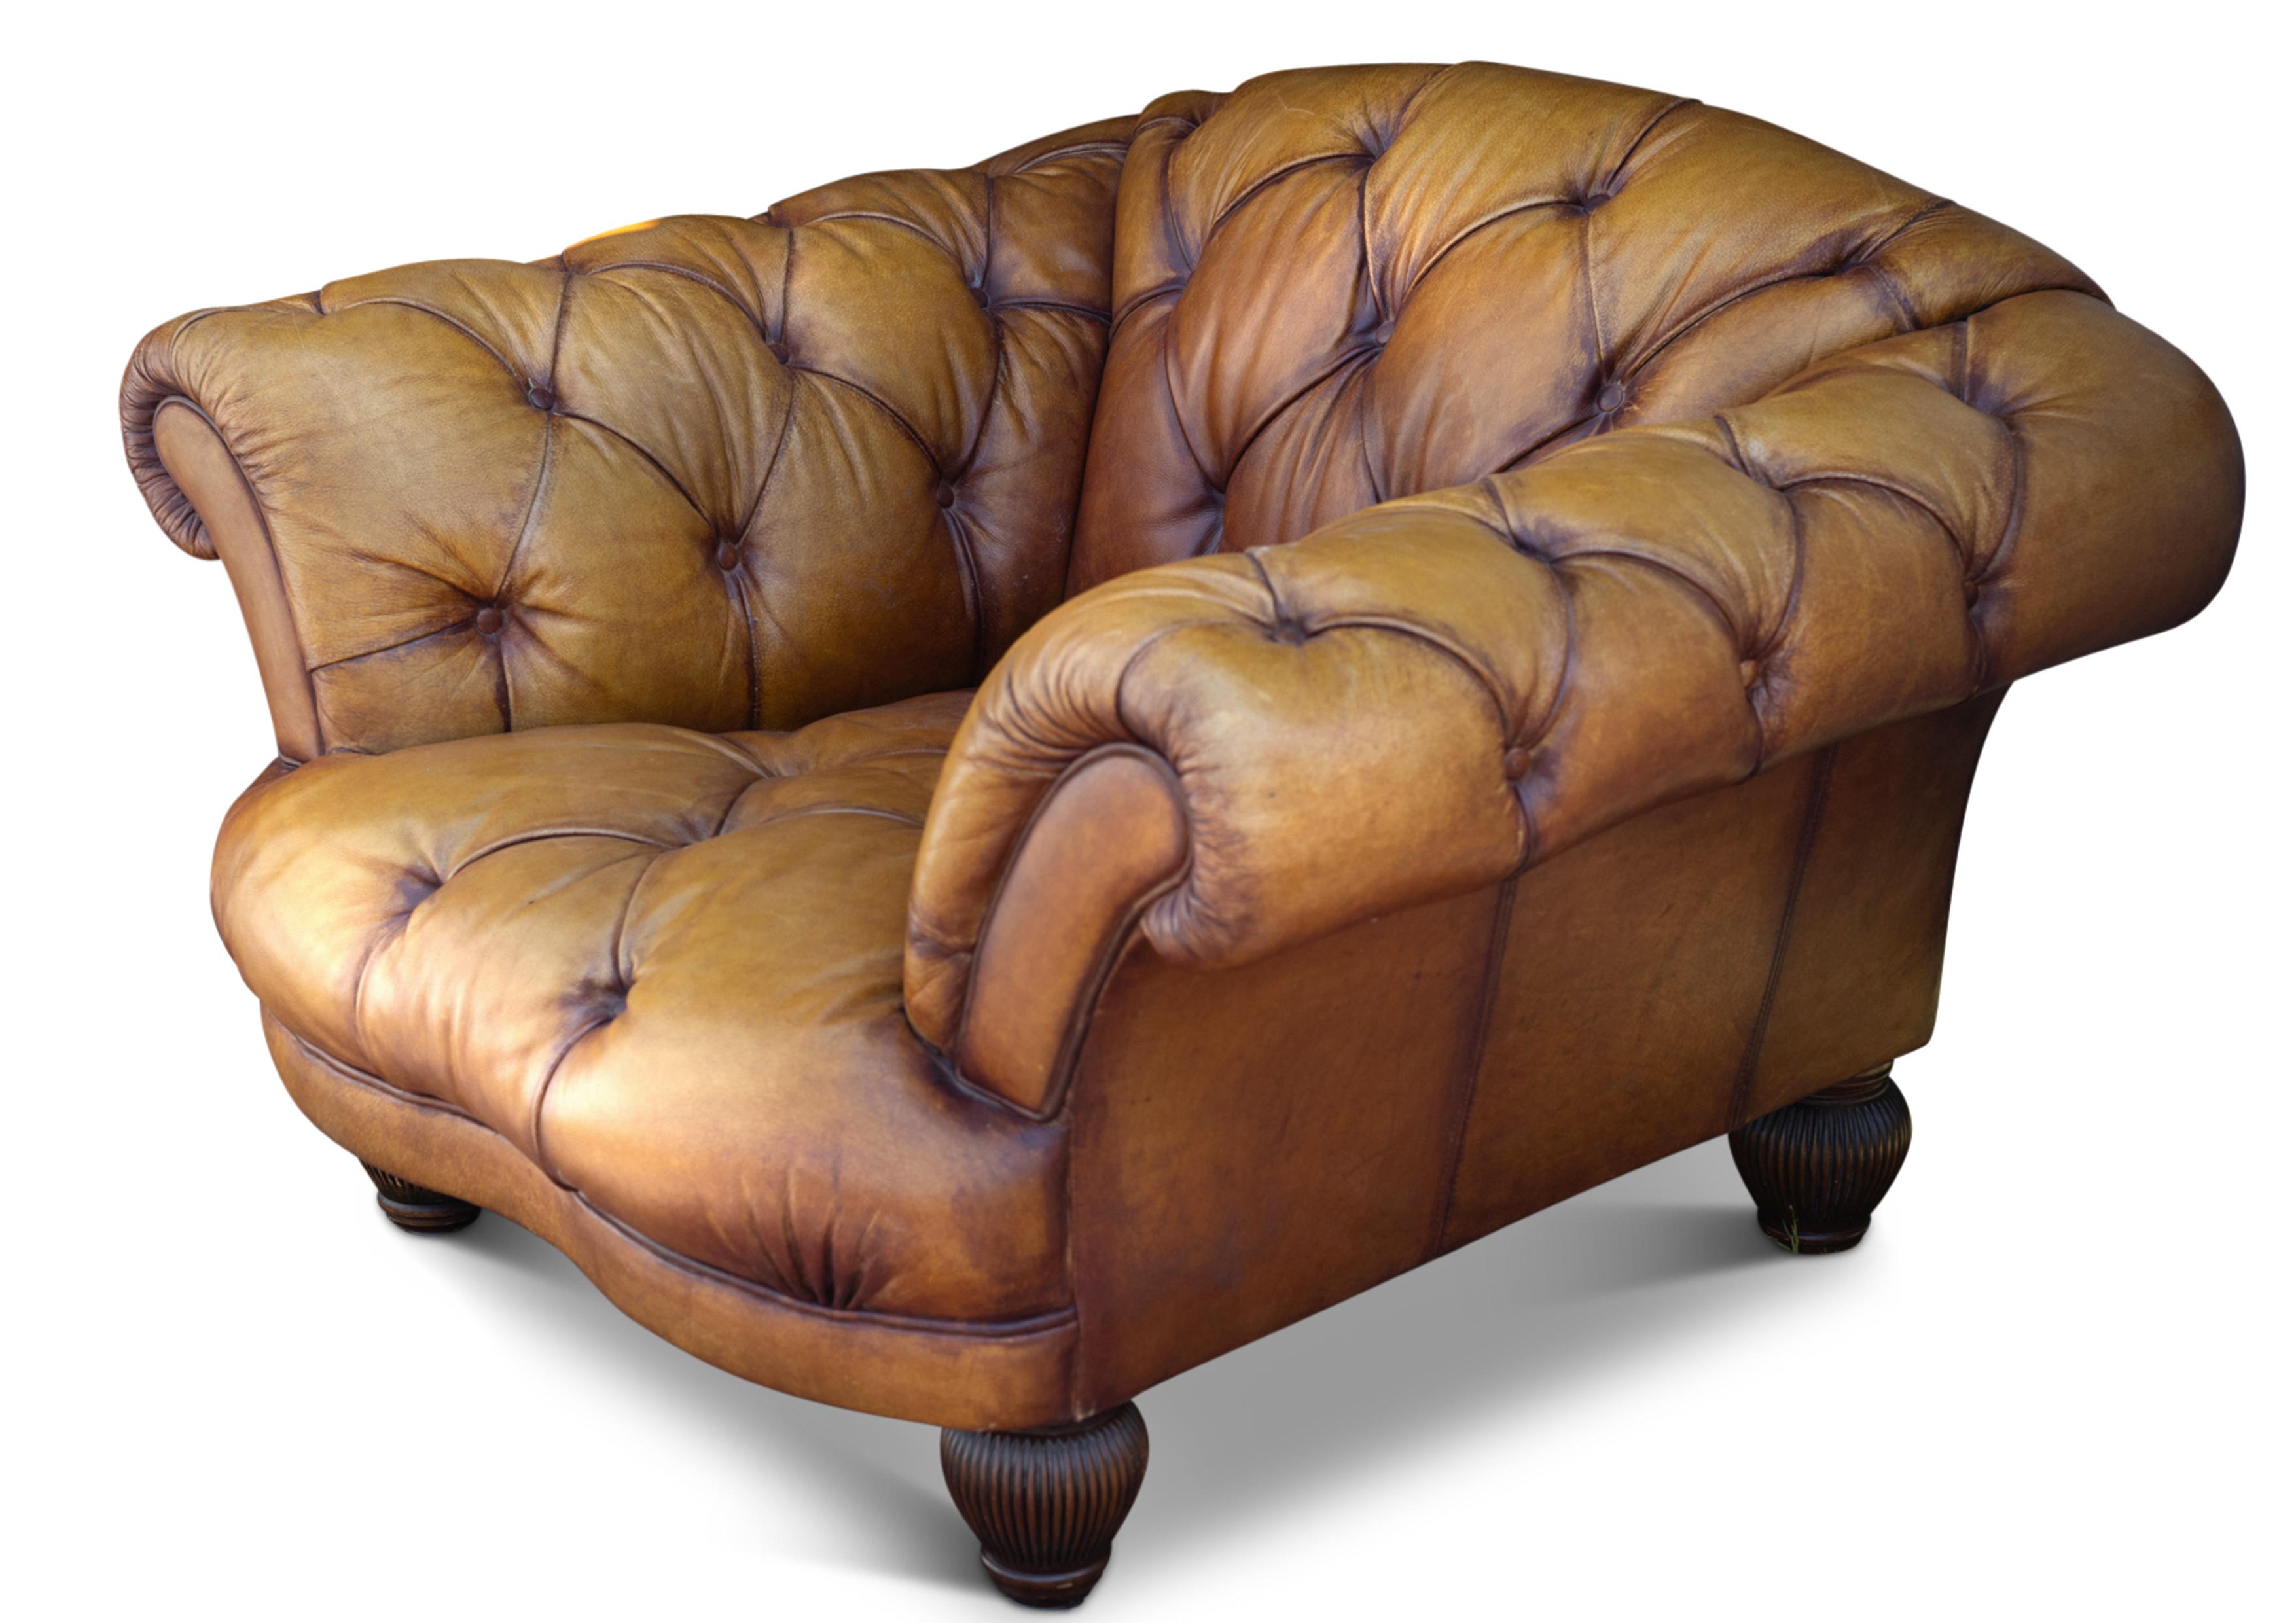 Victorian Grand Tour Design Tan Buffalo Hide Leather Deep Button Chesterfield Club Chair with Matching Chesterfield Footstool 

Handmade in England  using high quality solid timber frame, with the utmost durability and strength.
Finished with a set